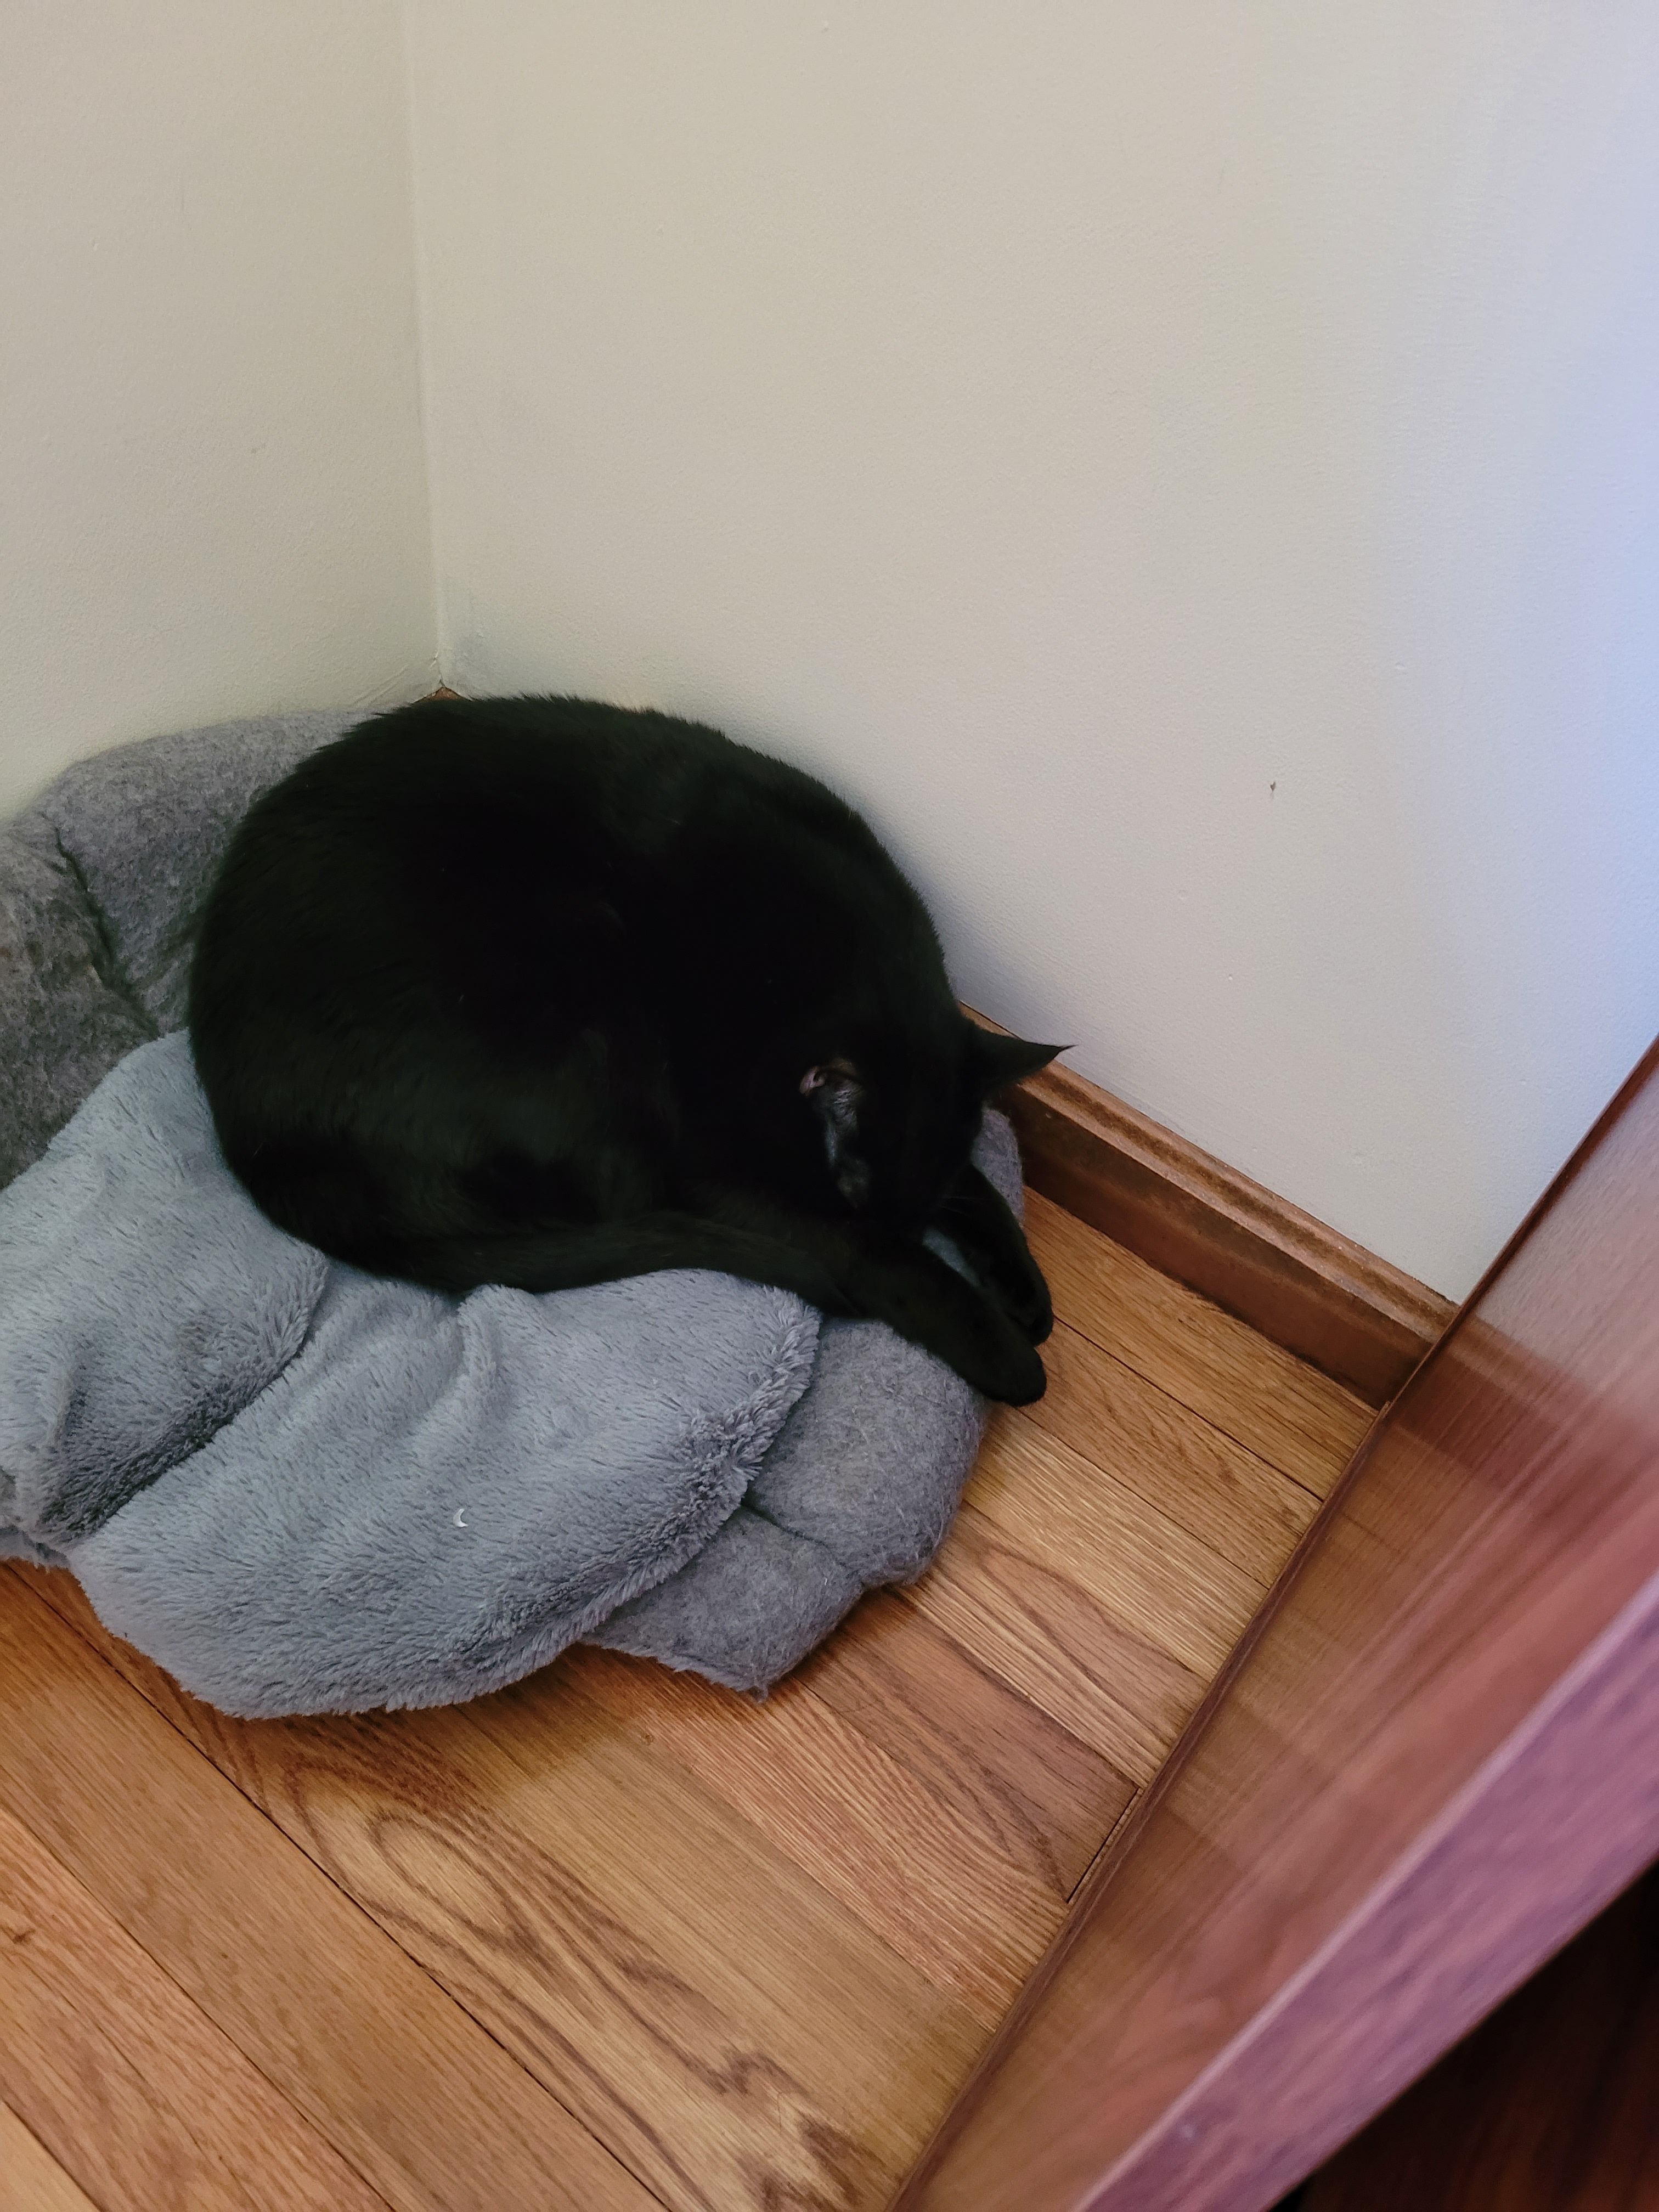 A picture of a black cat curled up on a bed taken on a Galaxy S20 FE